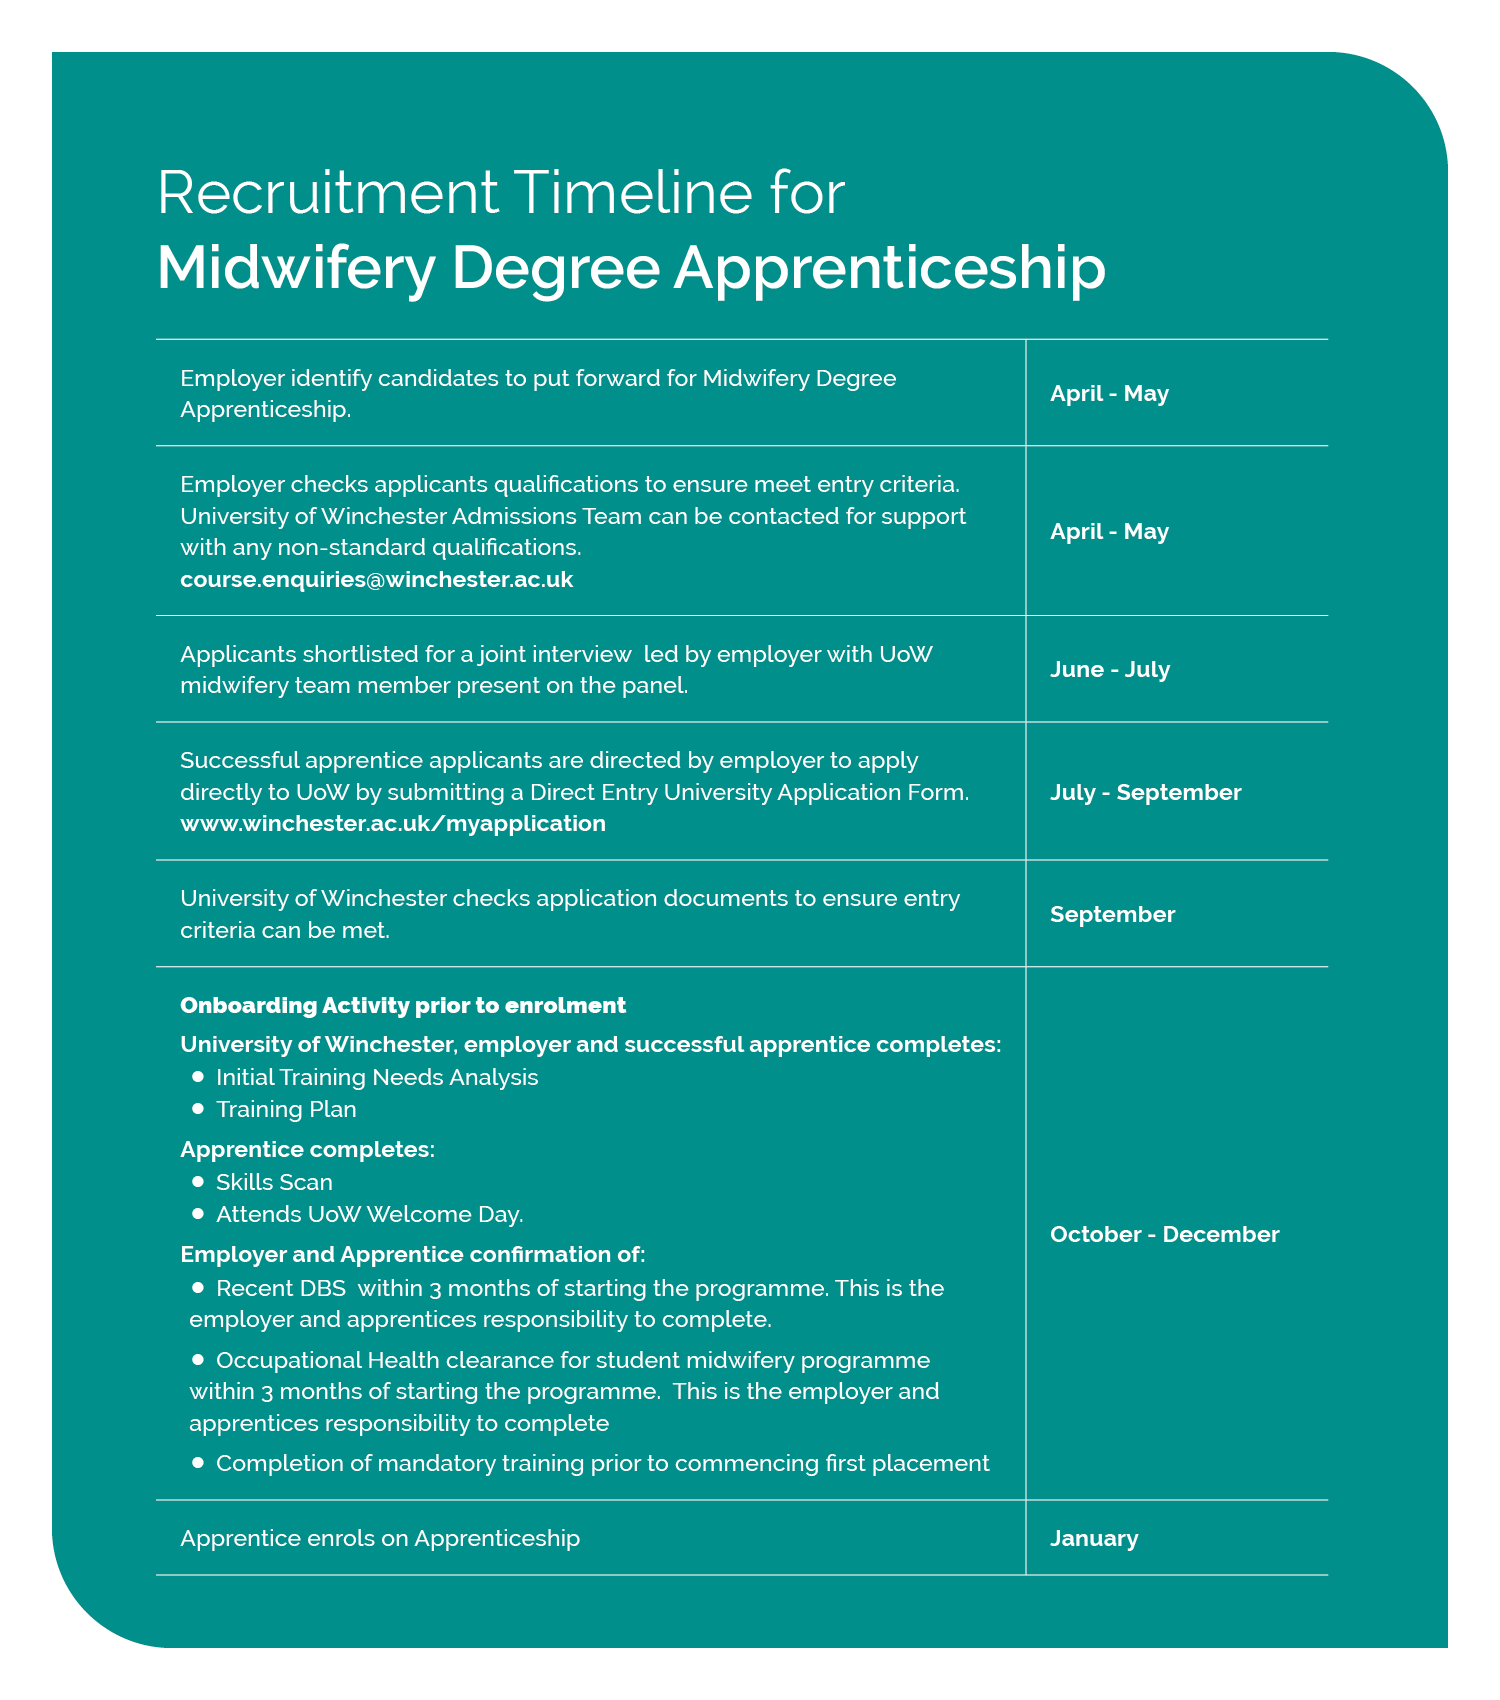 Flow chart of the application process for Midwifery Apprenticeships